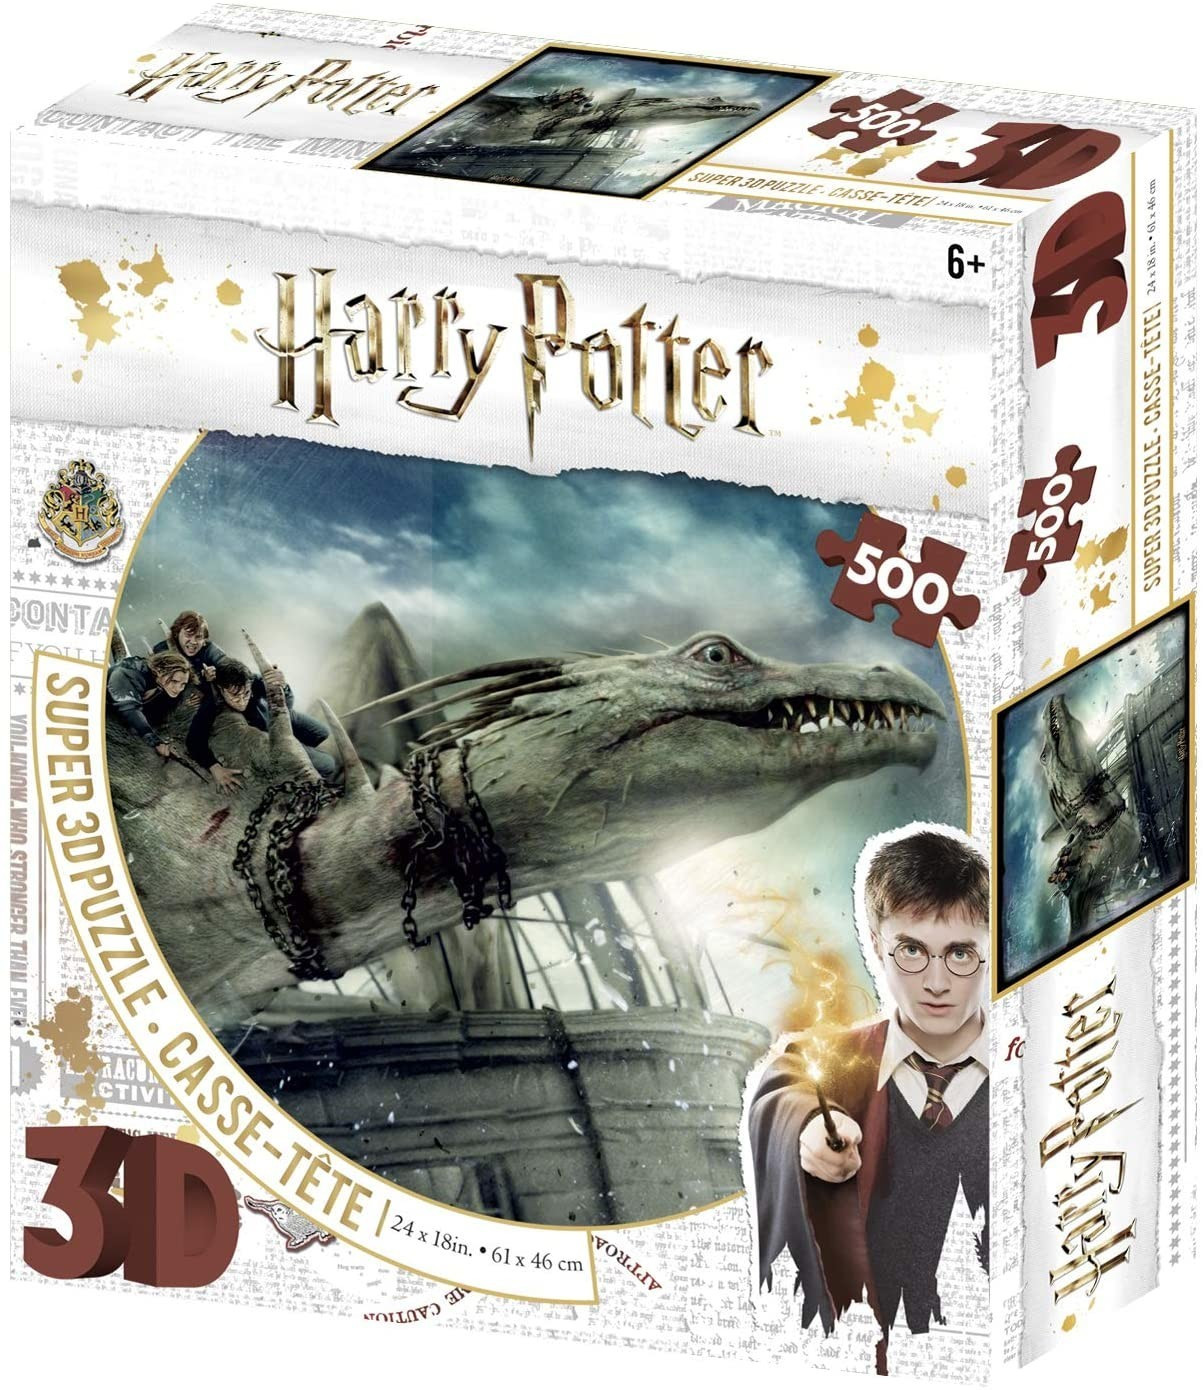 Photos - Jigsaw Puzzle / Mosaic Prime3D Norbert Woll Woll Harry Potter Super 3D Puzzle 